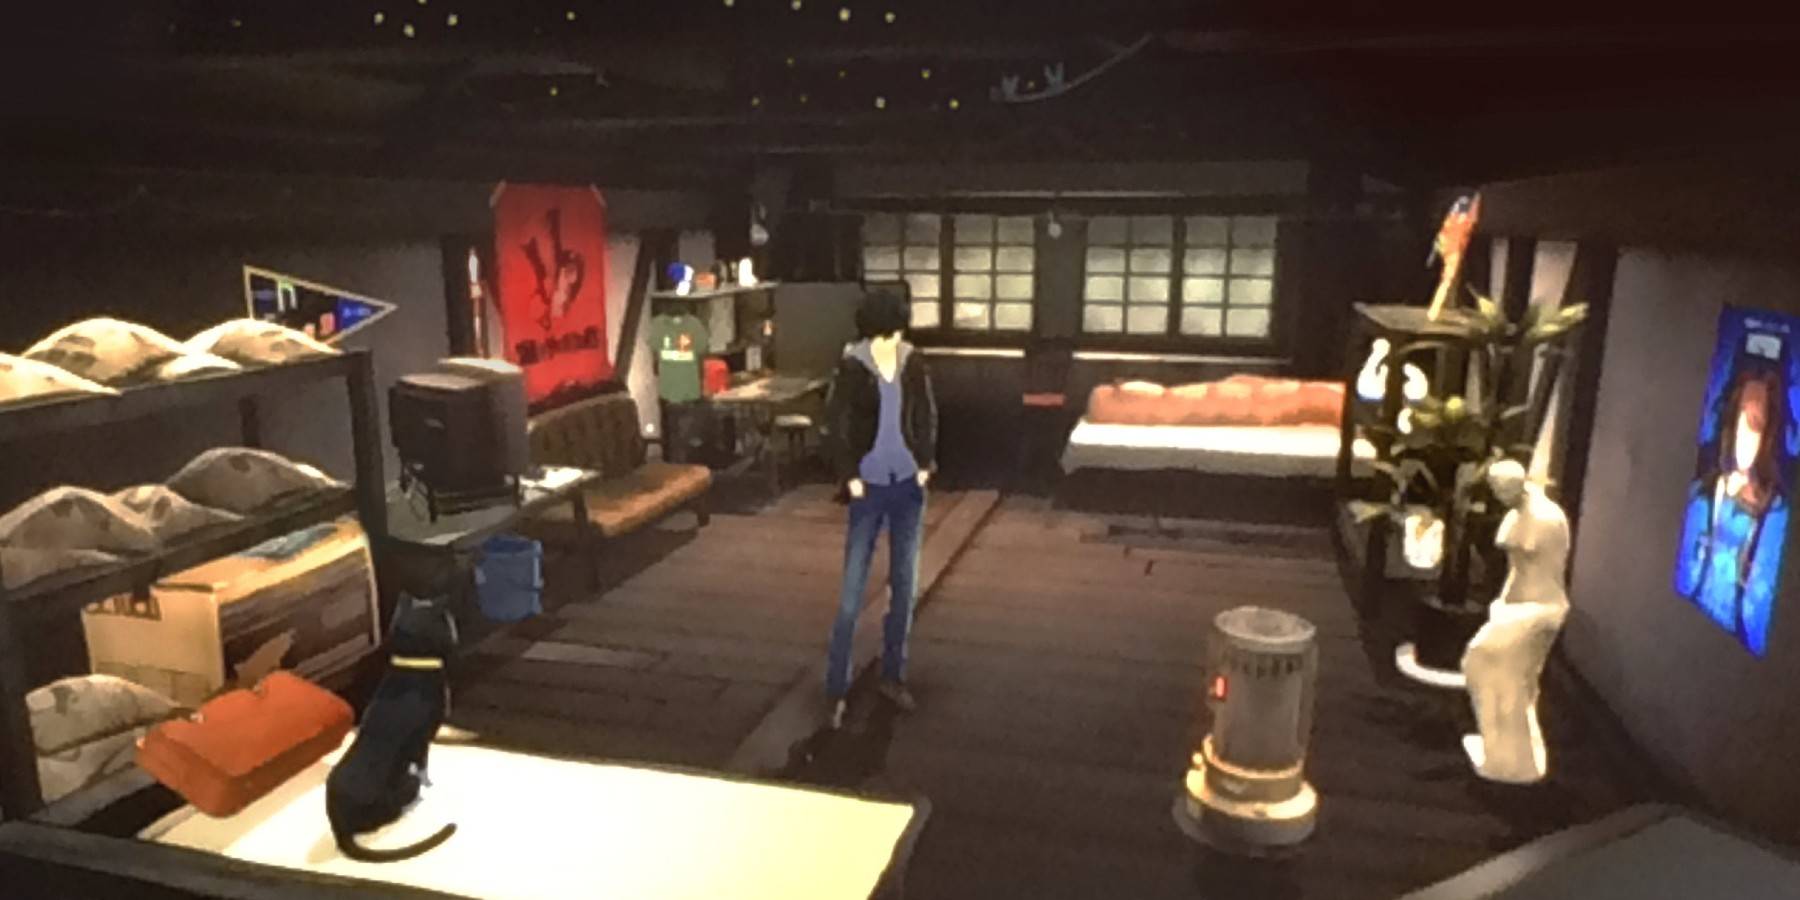 Decorate Your Room In Persona 5 Royal, How To Decorate Your Room In Persona 5